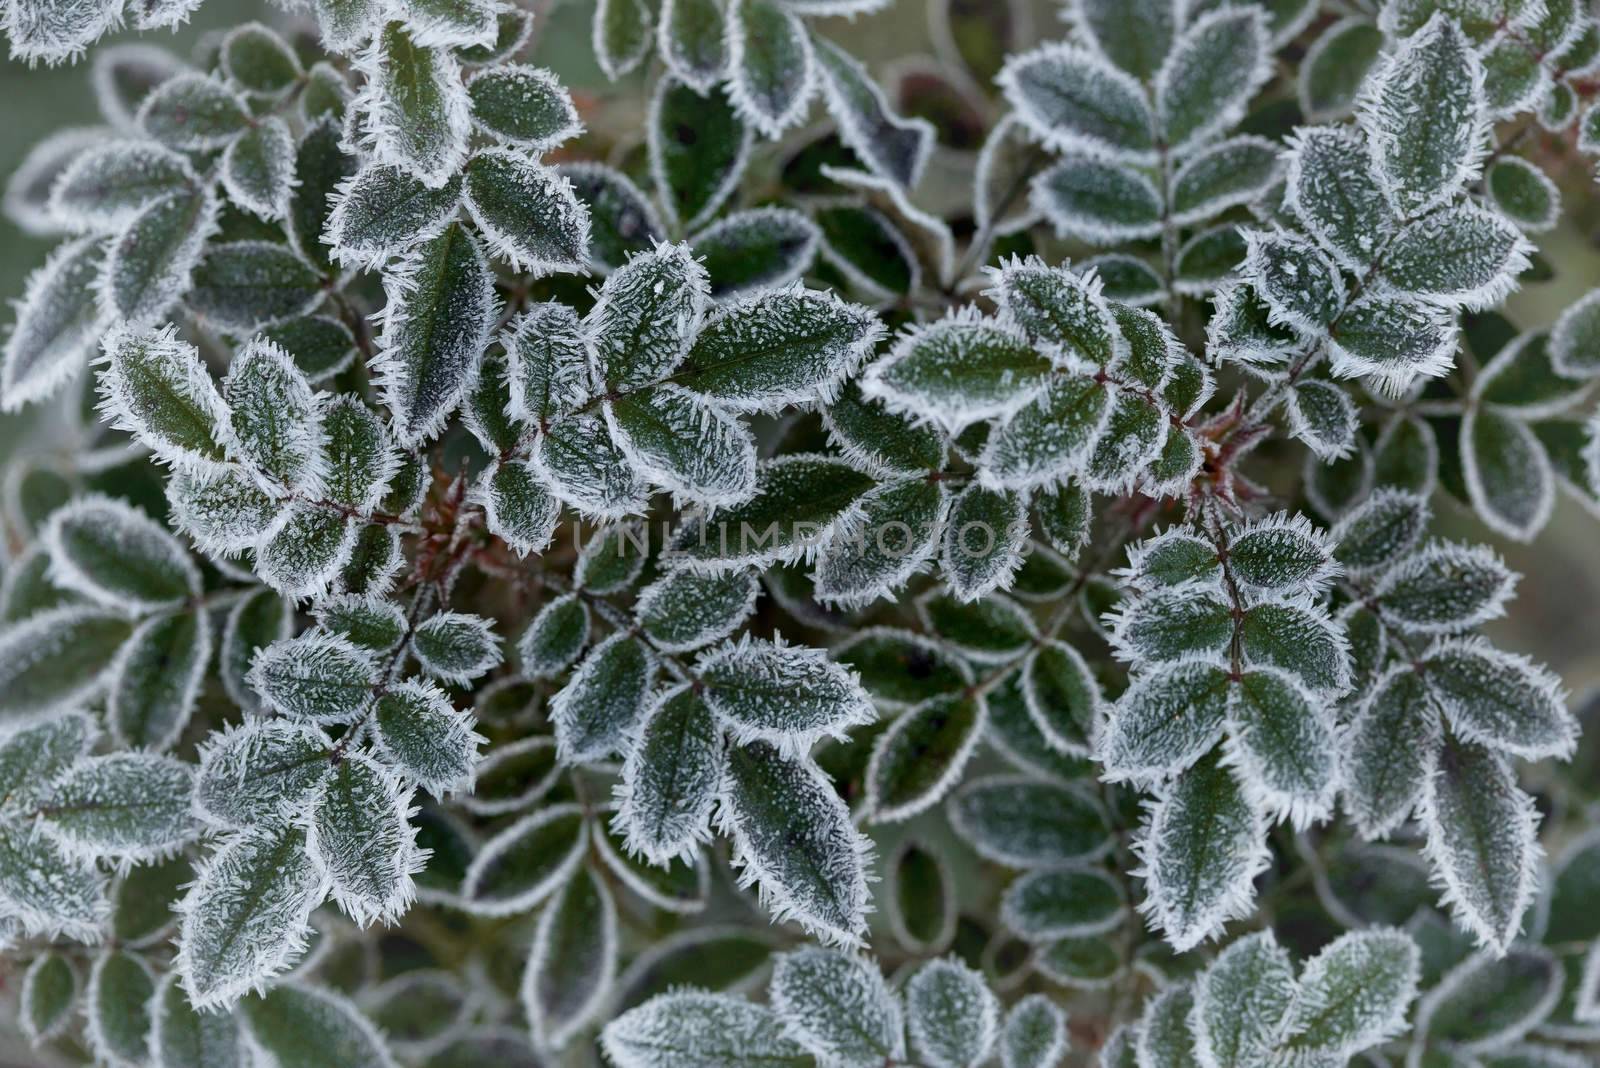 Rose Leaves in the frost. by sergey_pankin